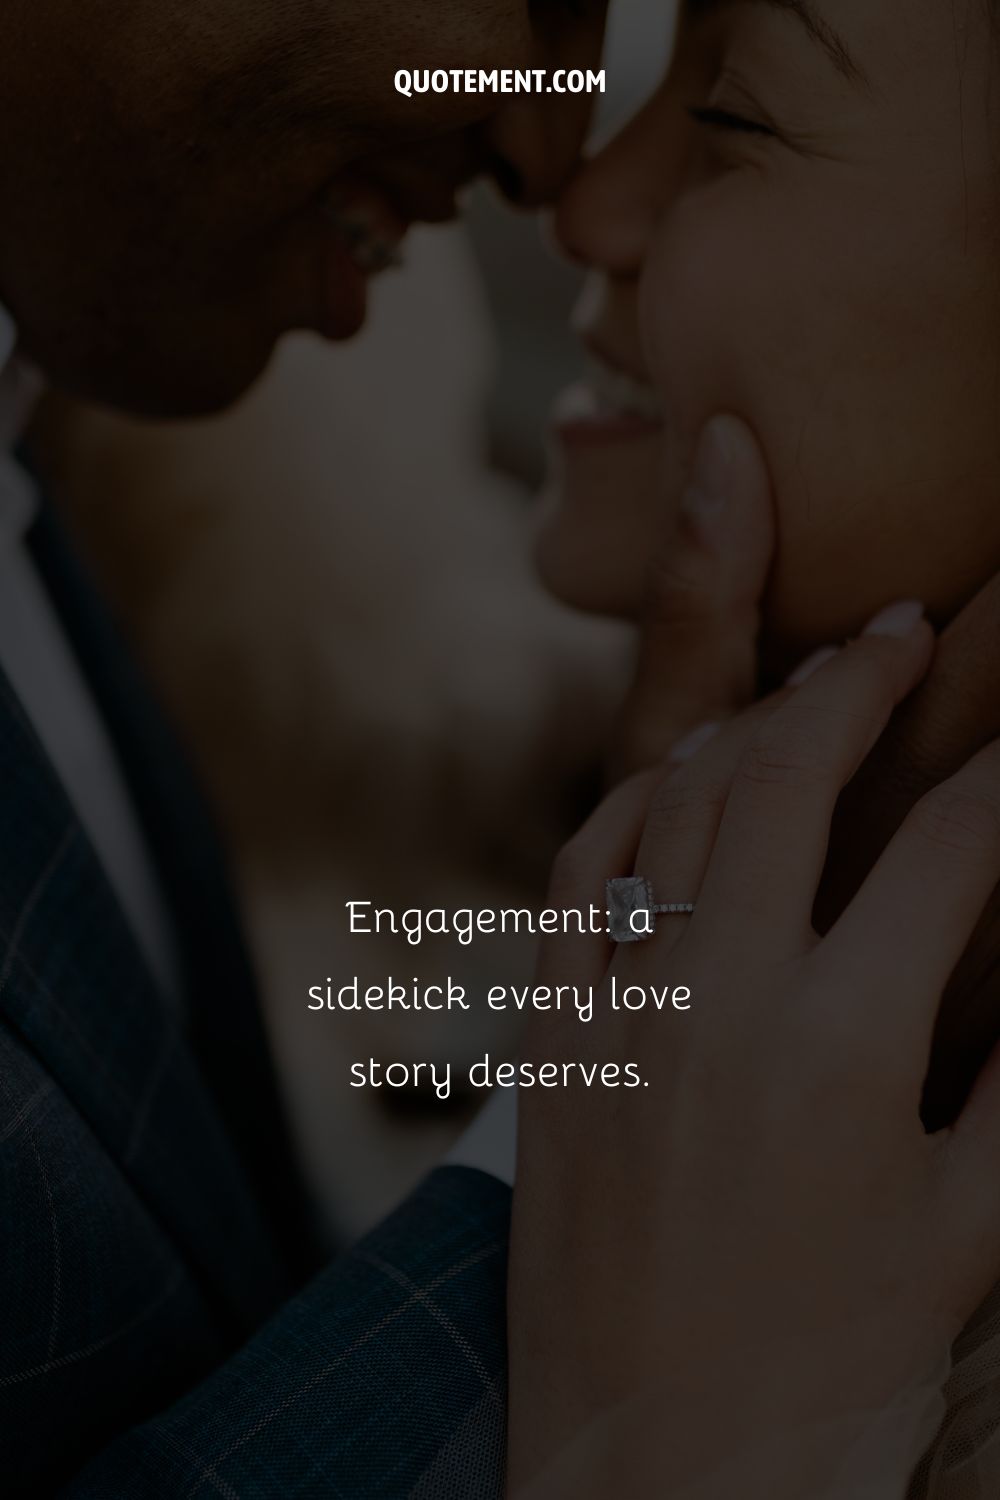 Engagement a sidekick every love story deserves.